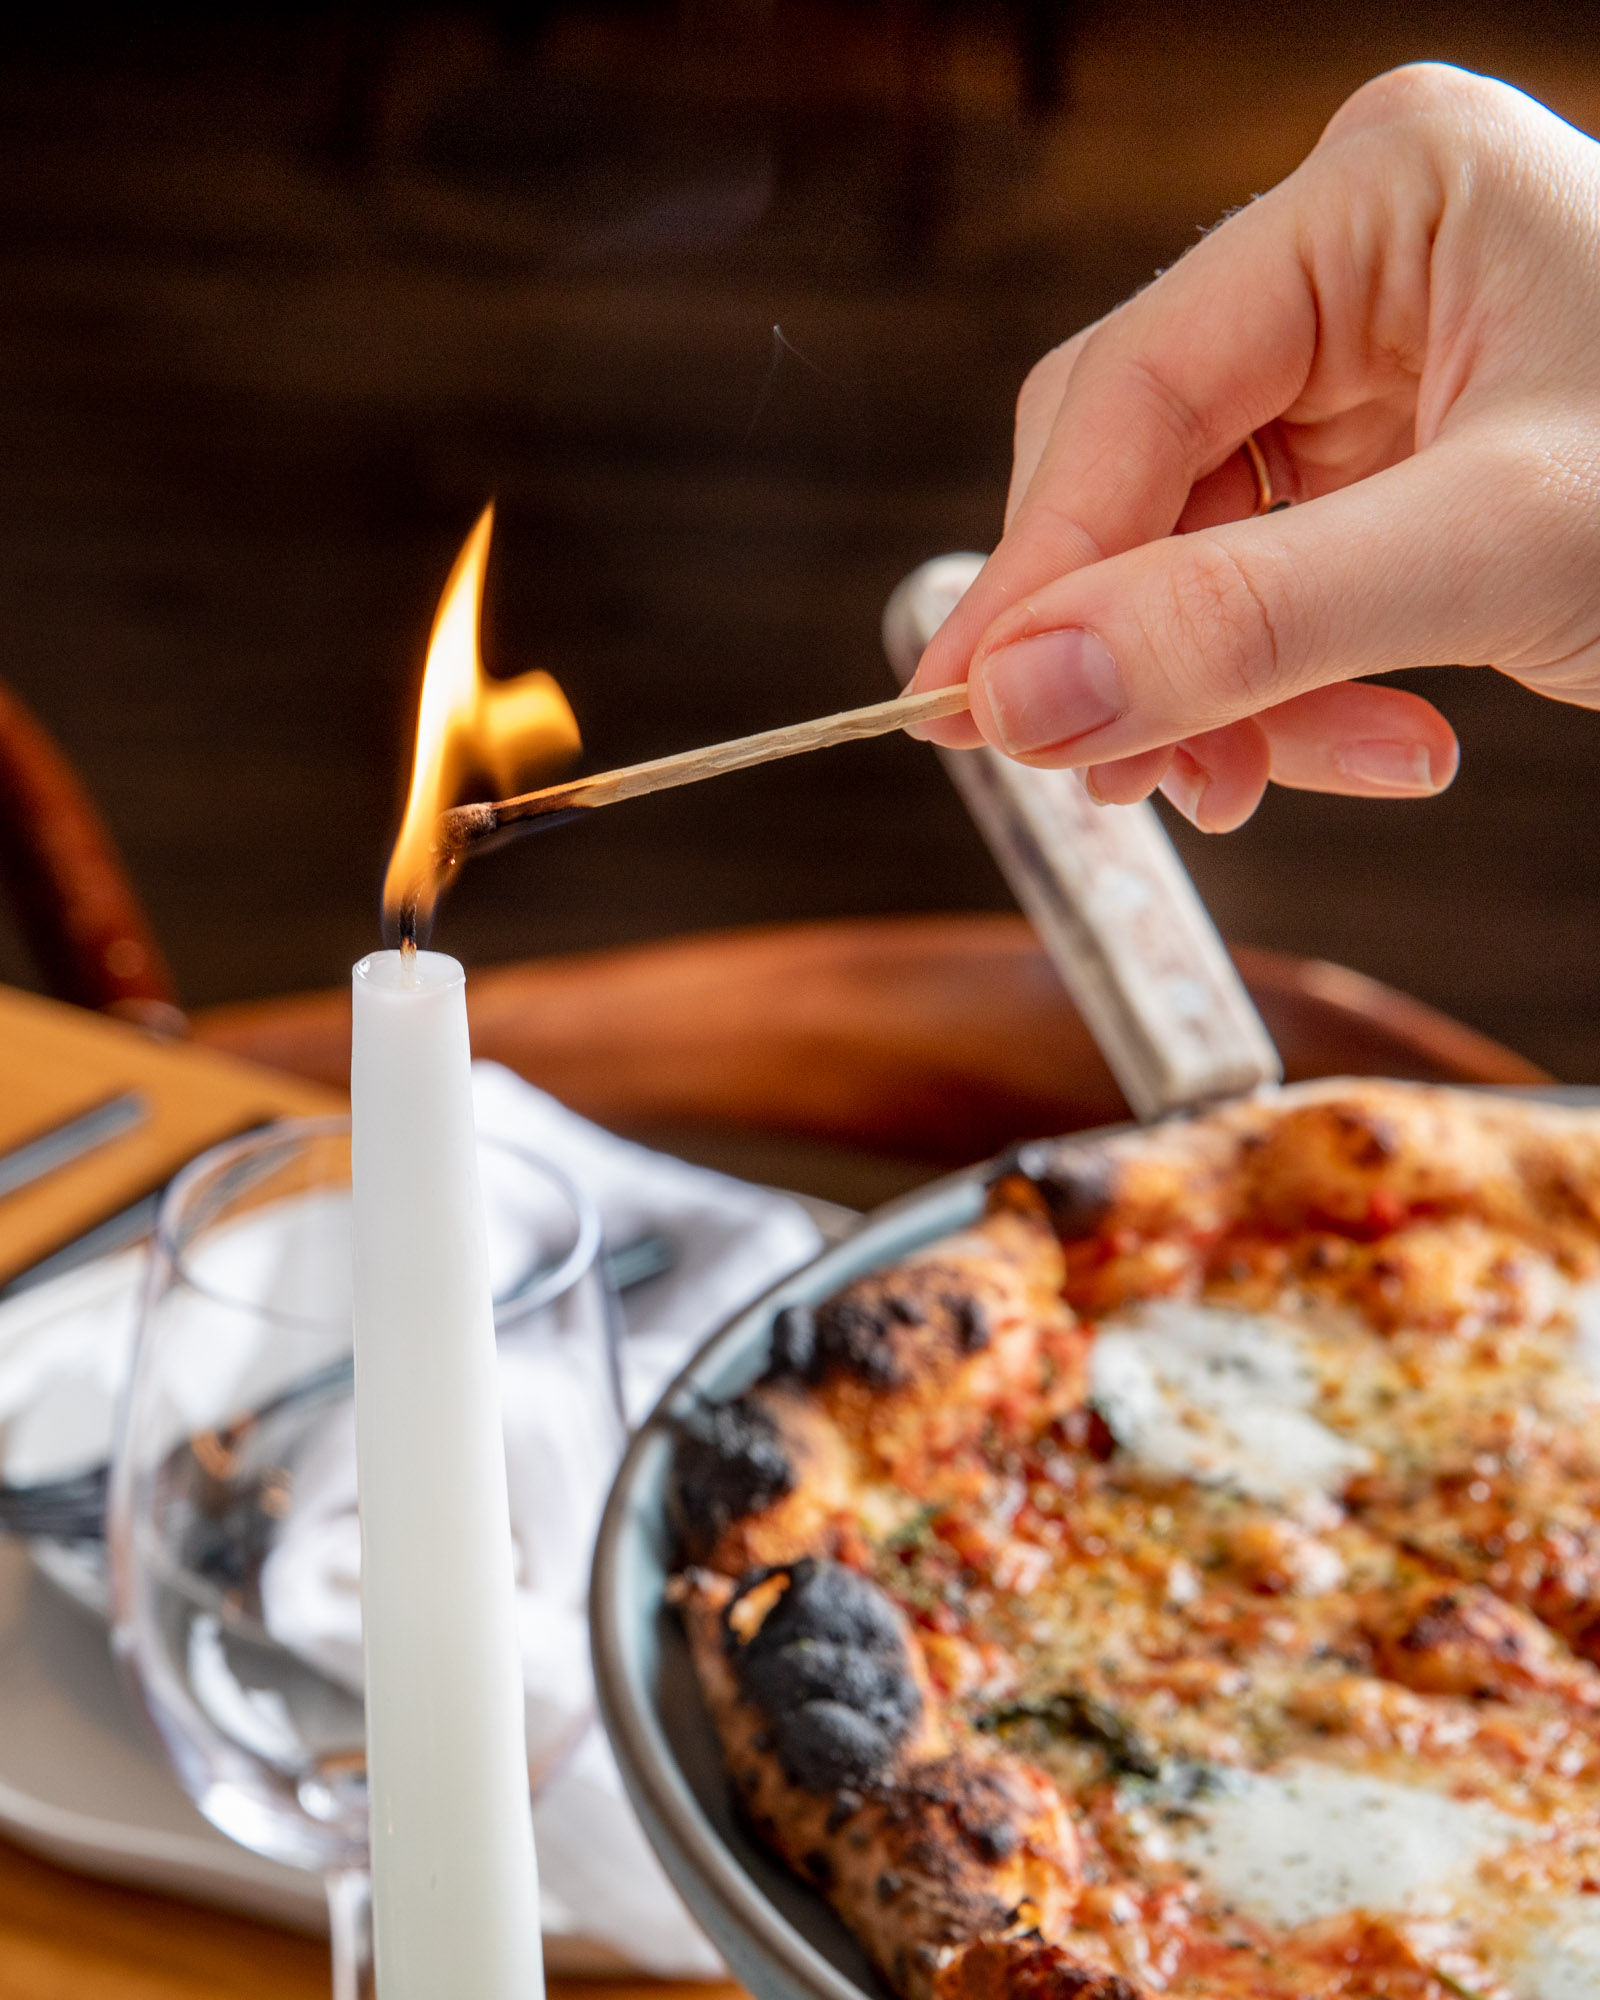 A candle being lit next to a romantic pizza